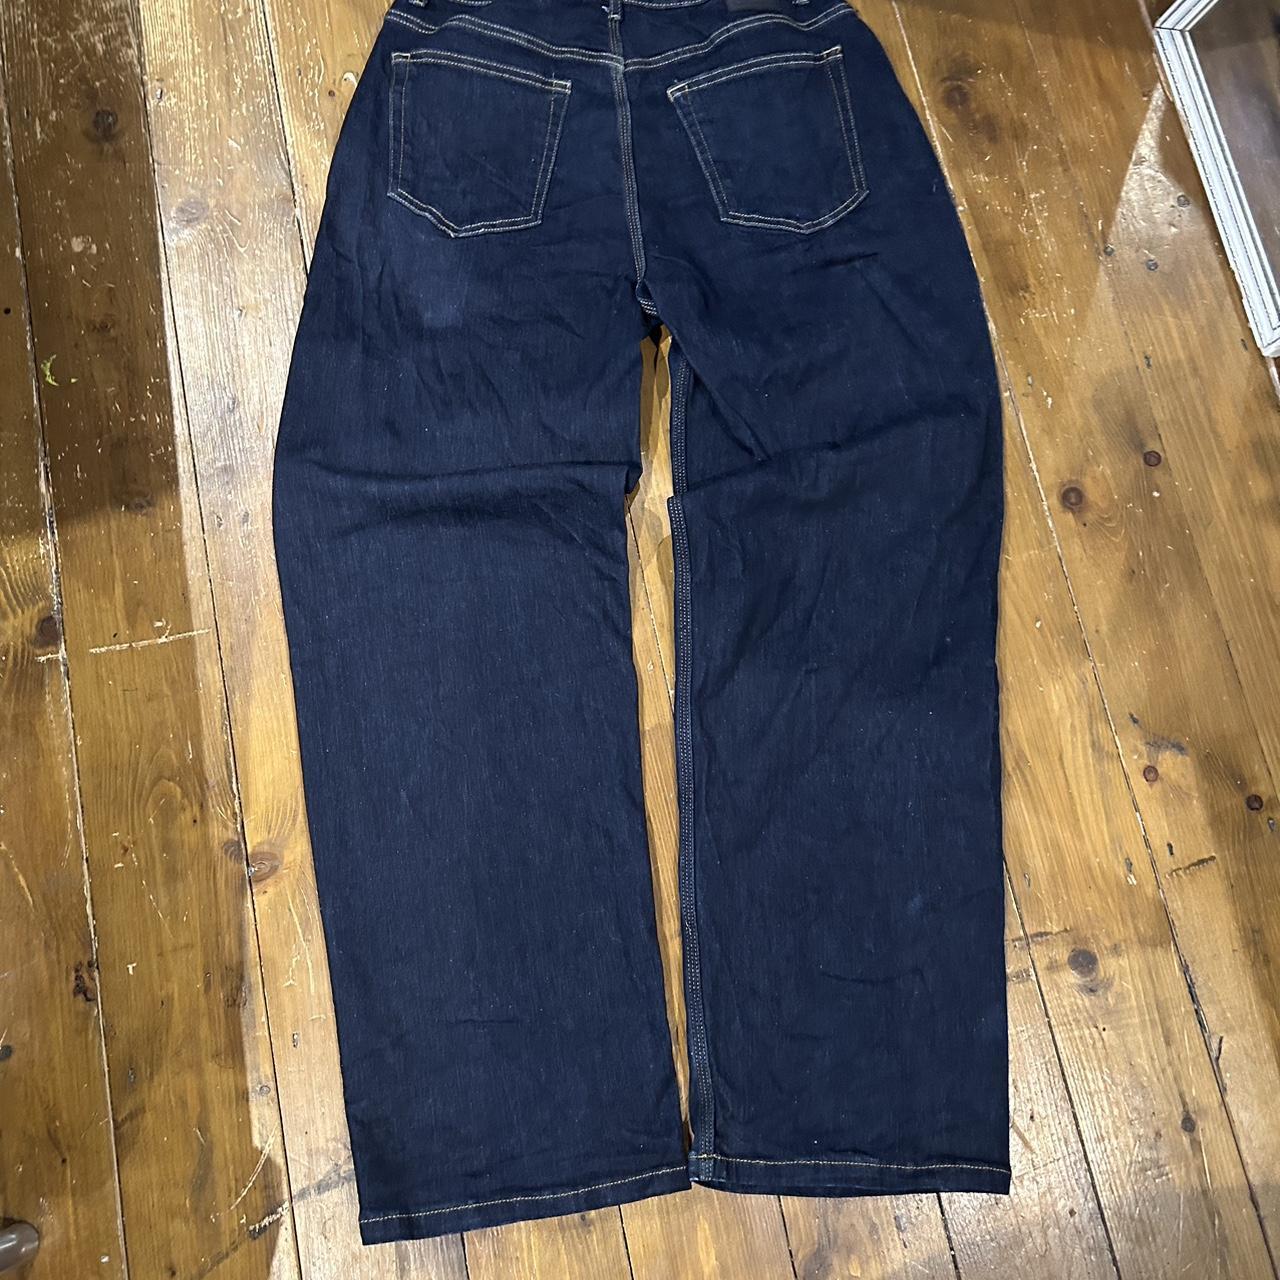 Route one baggy jeans Navy 32’ length Great condition - Depop